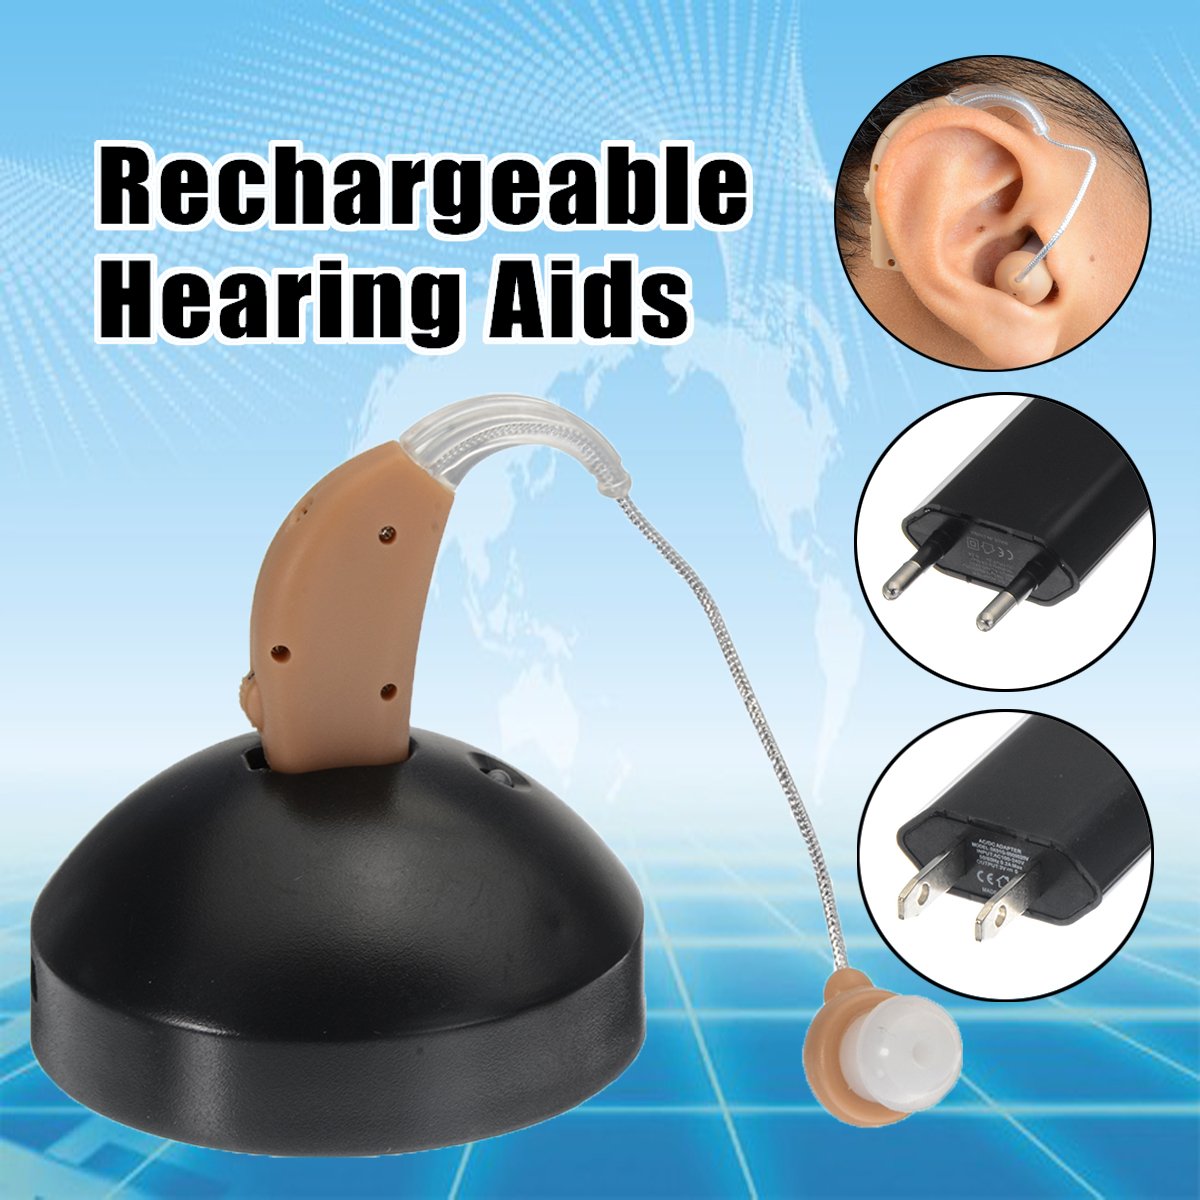 Rechargeable Hearing Aids Personal (end 11/27/2020 2:15 PM)